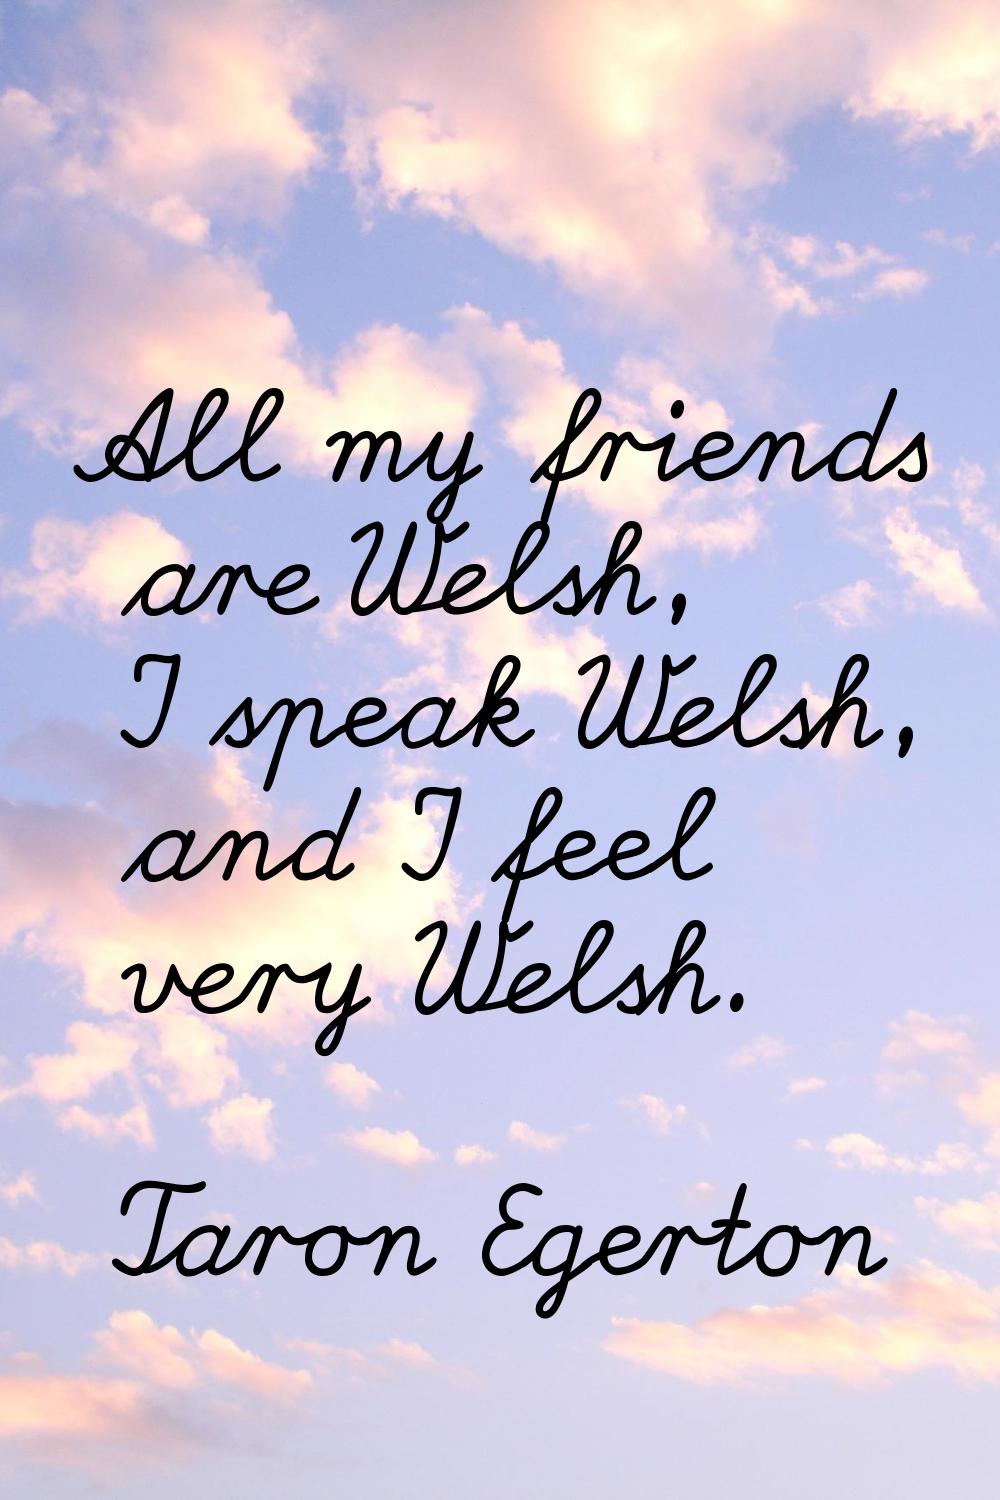 All my friends are Welsh, I speak Welsh, and I feel very Welsh.